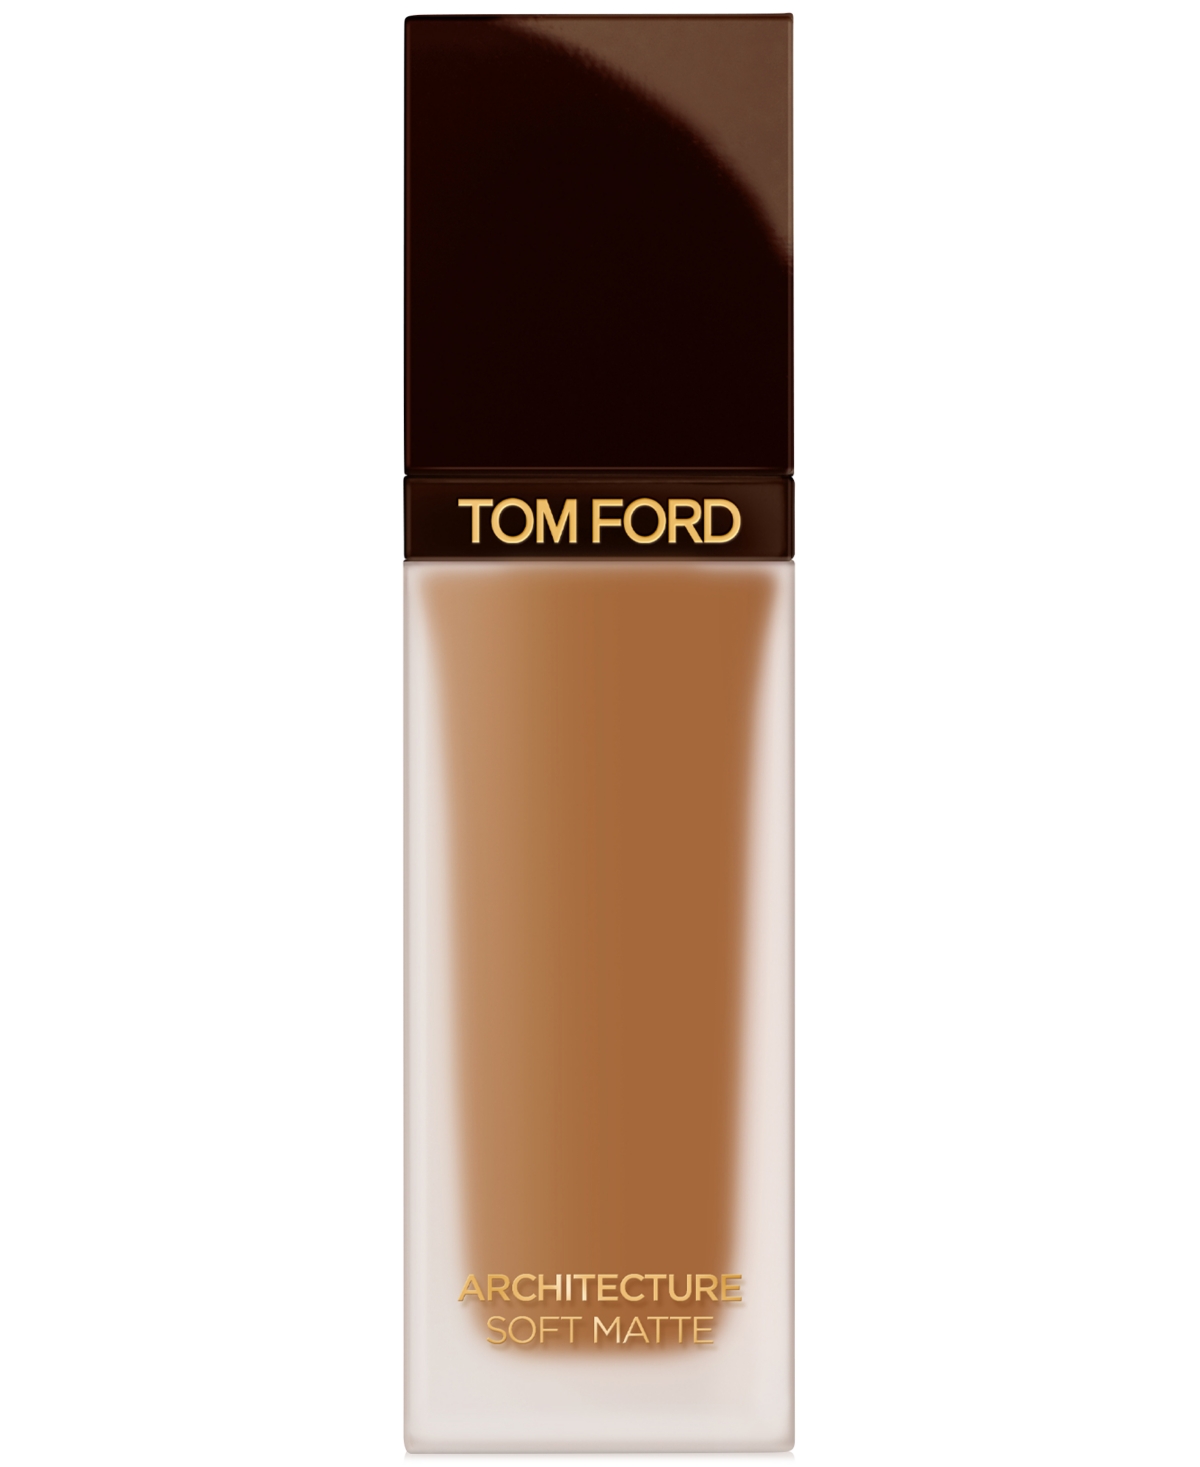 Tom Ford Architecture Soft Matte Blurring Foundation In White